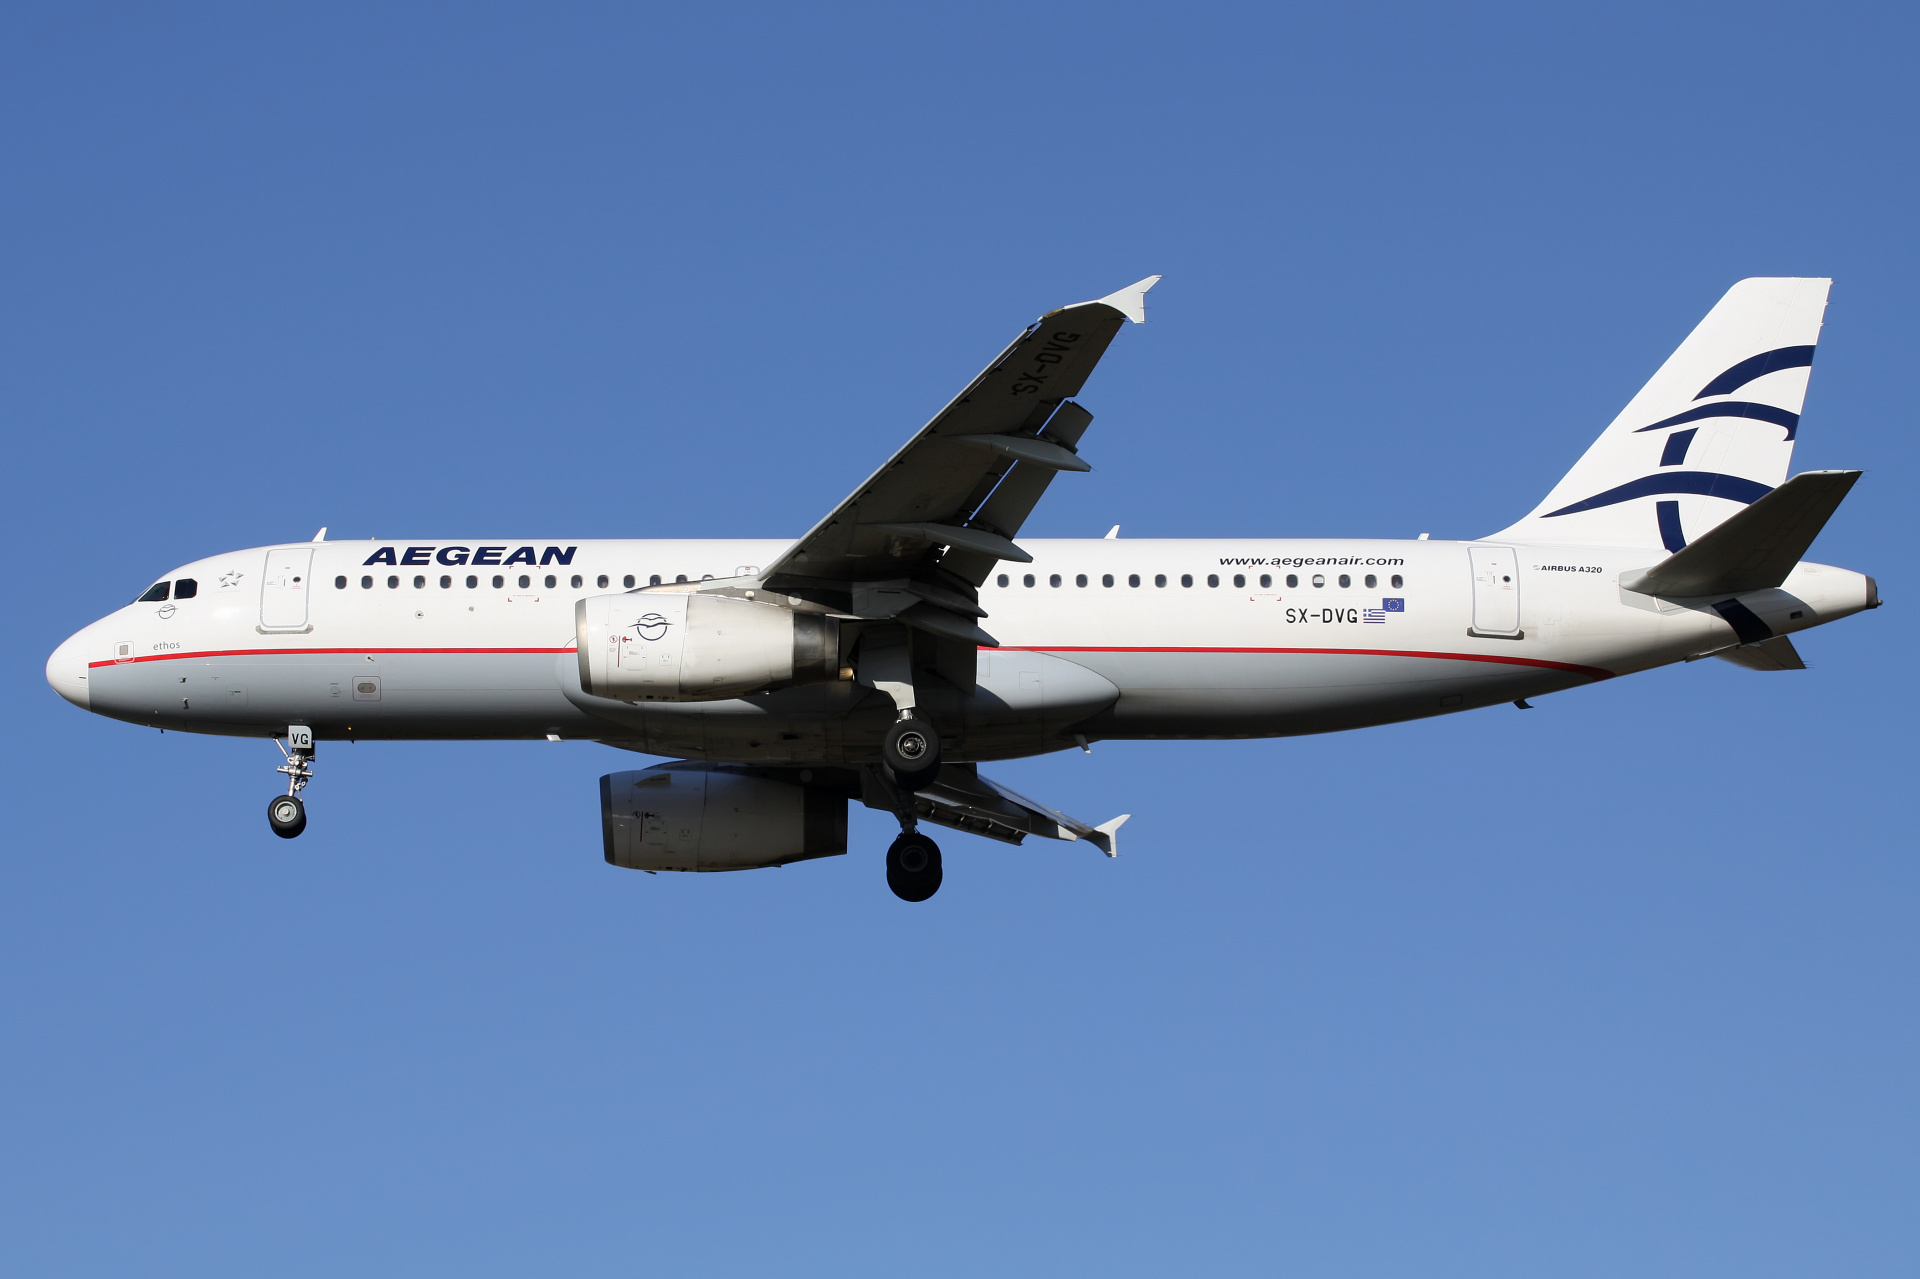 SX-DVG (Aircraft » EPWA Spotting » Airbus A320-200 » Aegean Airlines)